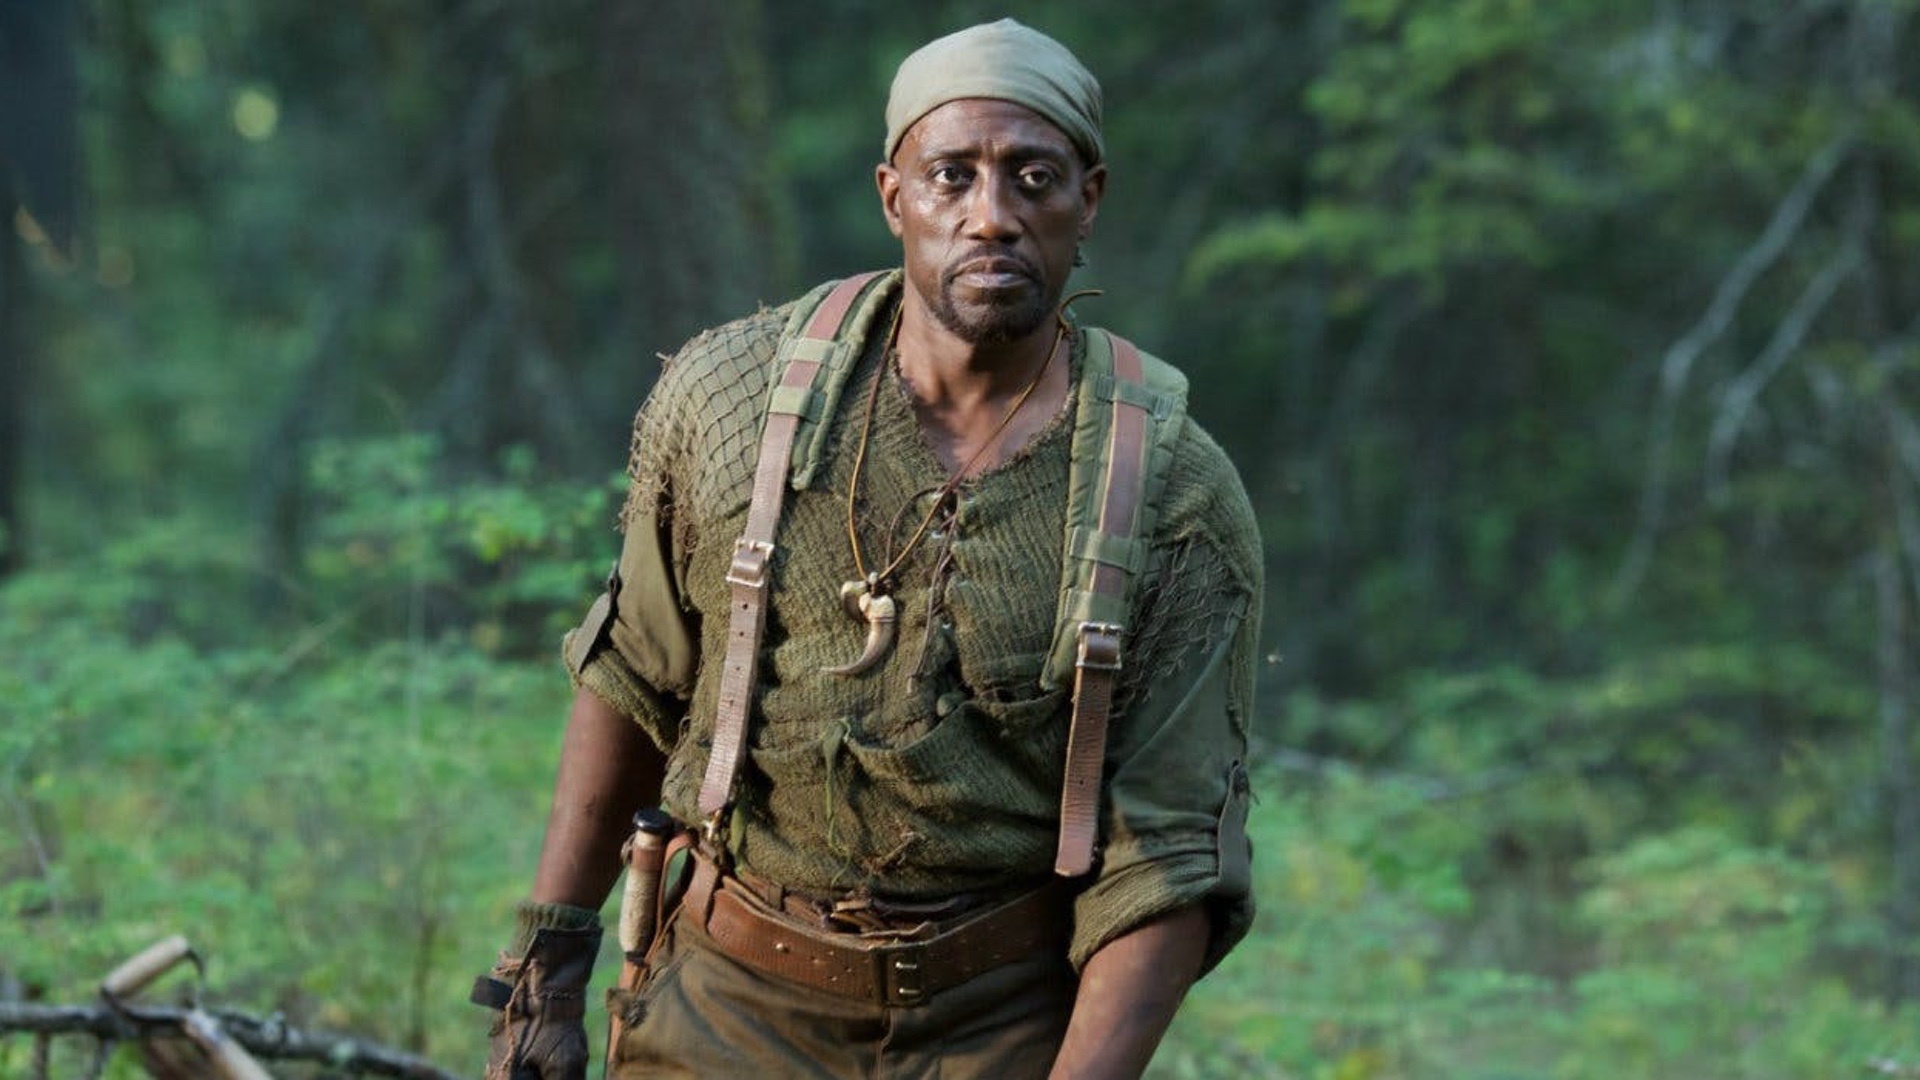 Wesley Snipes Movies, Zombie action film, Actor's new project, Exciting thriller, 1920x1080 Full HD Desktop